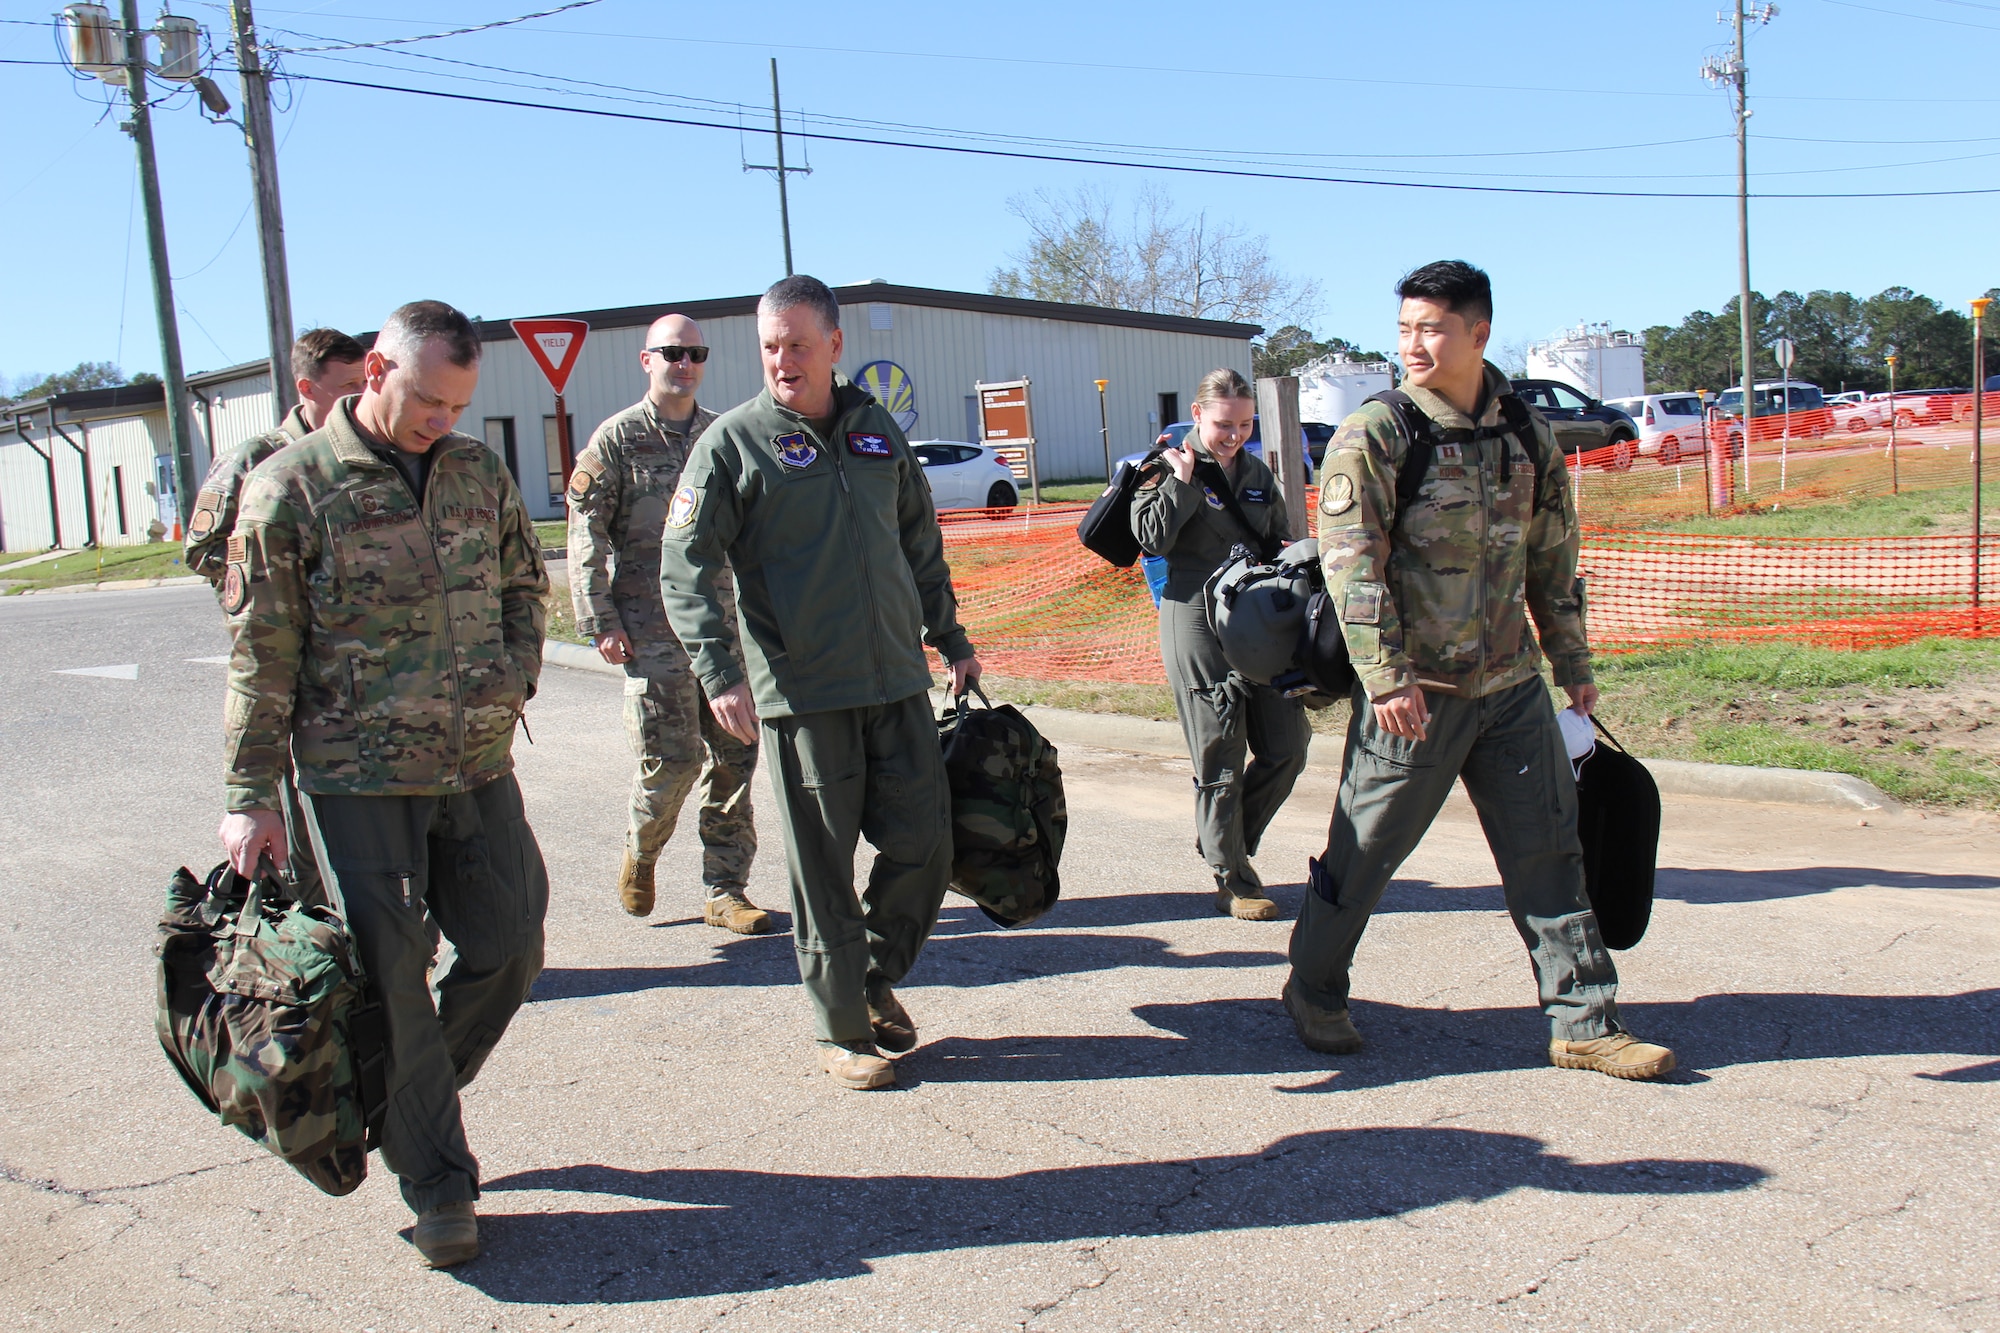 Air Force Chief Master Sgt. Erik Thompson, Air Education and Training Command’s command chief master sergeant, and Lt. Gen. Marshall B. “Brad” Webb, AETC commander, walk to the Fort Rucker, Ala., flightline with 23rd Flying Training Squadron Airmen for an orientation flight in a TH-1H Huey